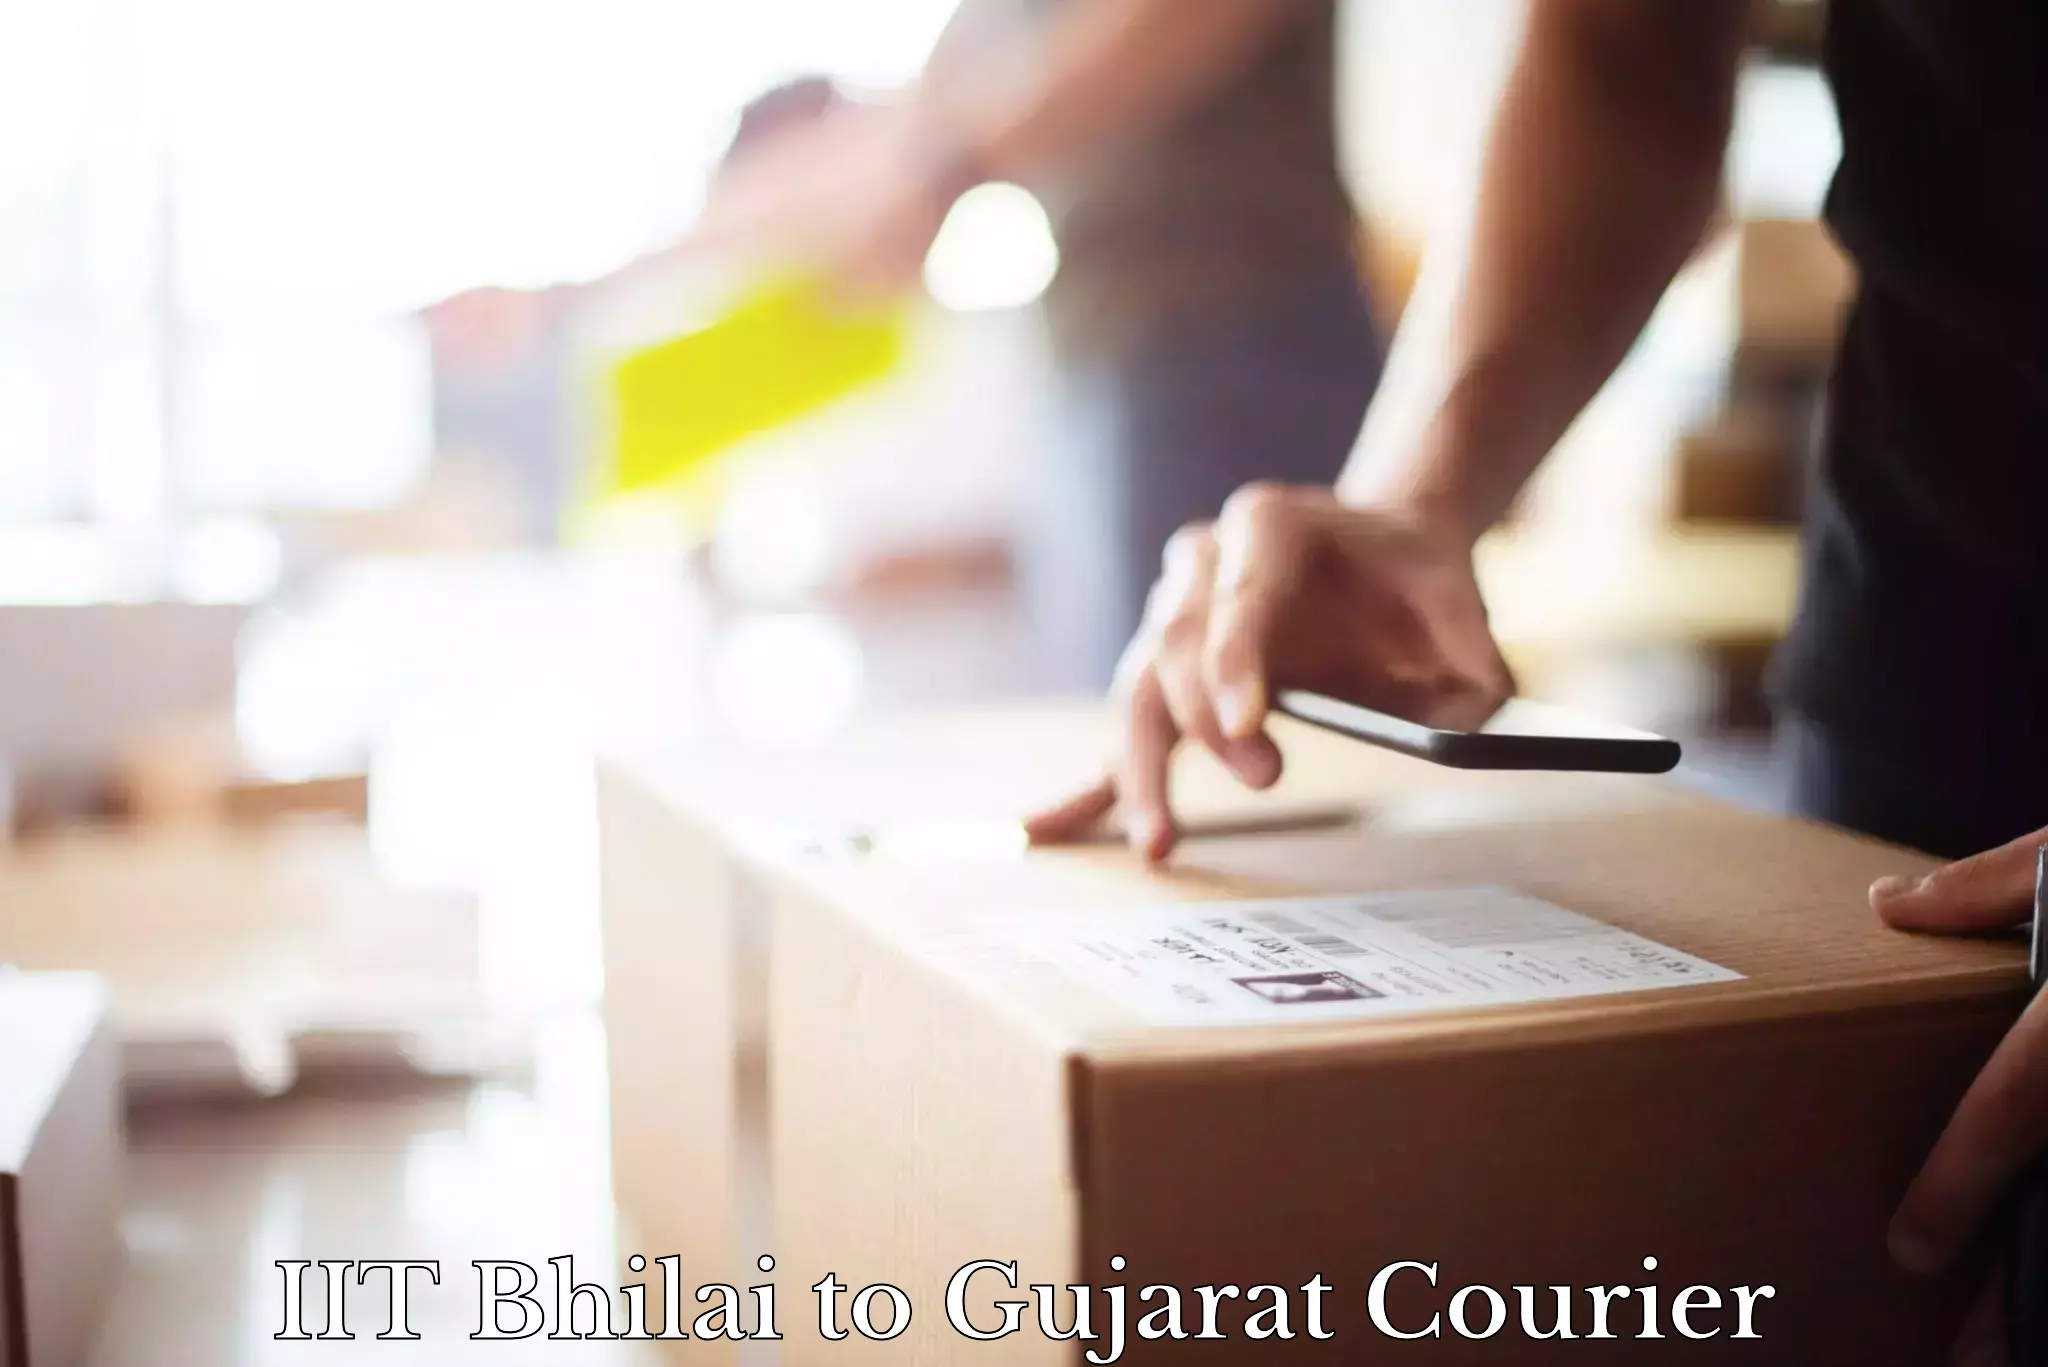 Express courier capabilities in IIT Bhilai to Dahod